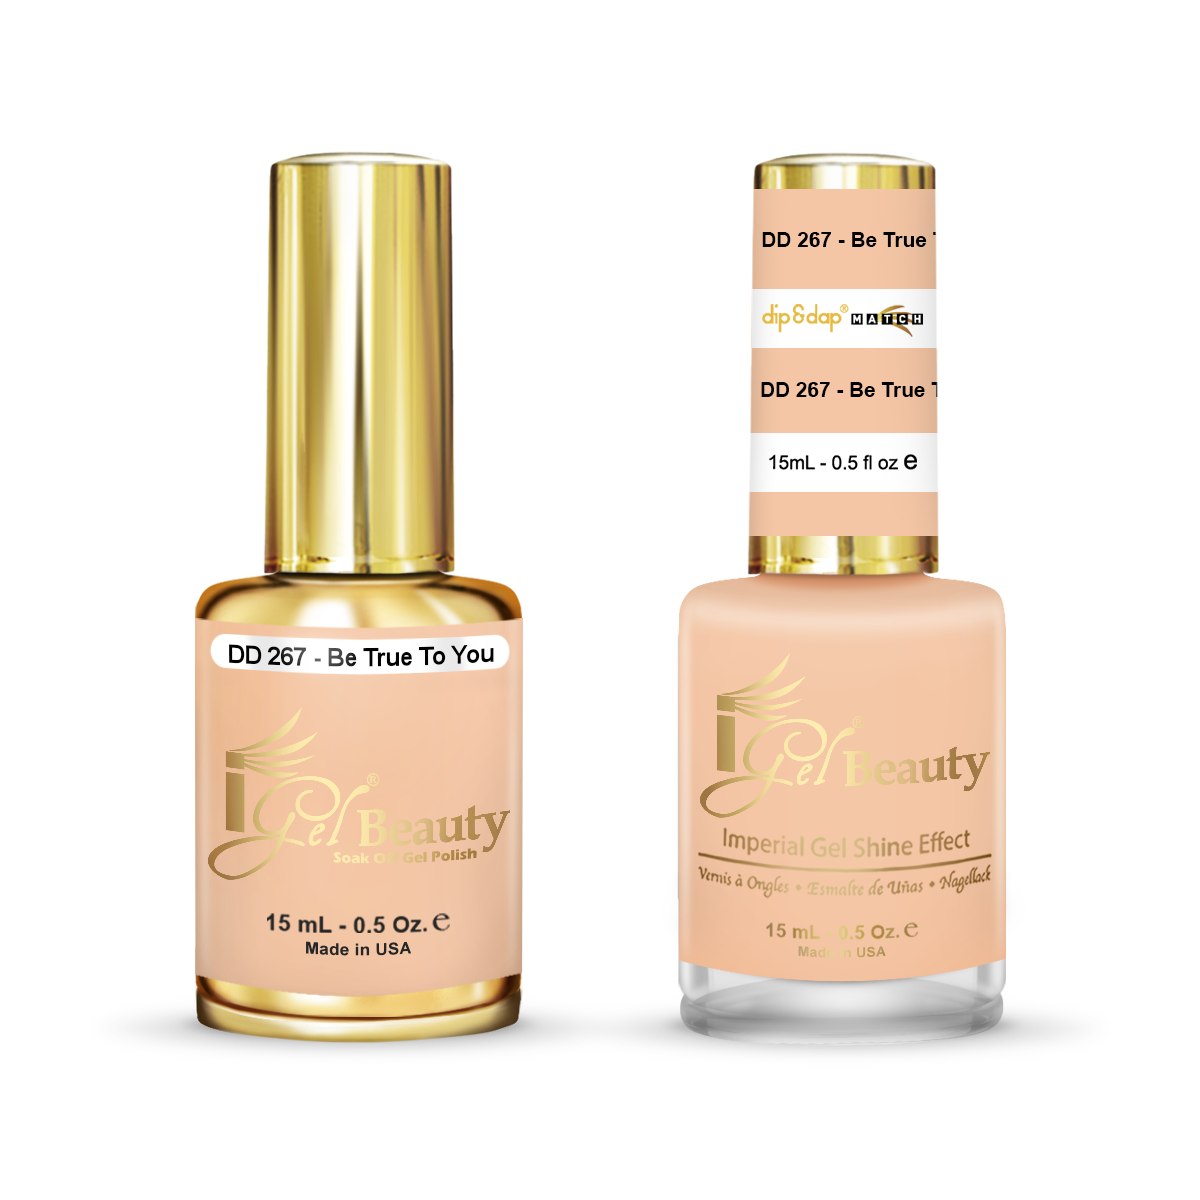 DD267 Be True To You Gel and Polish Duo By IGel Beauty